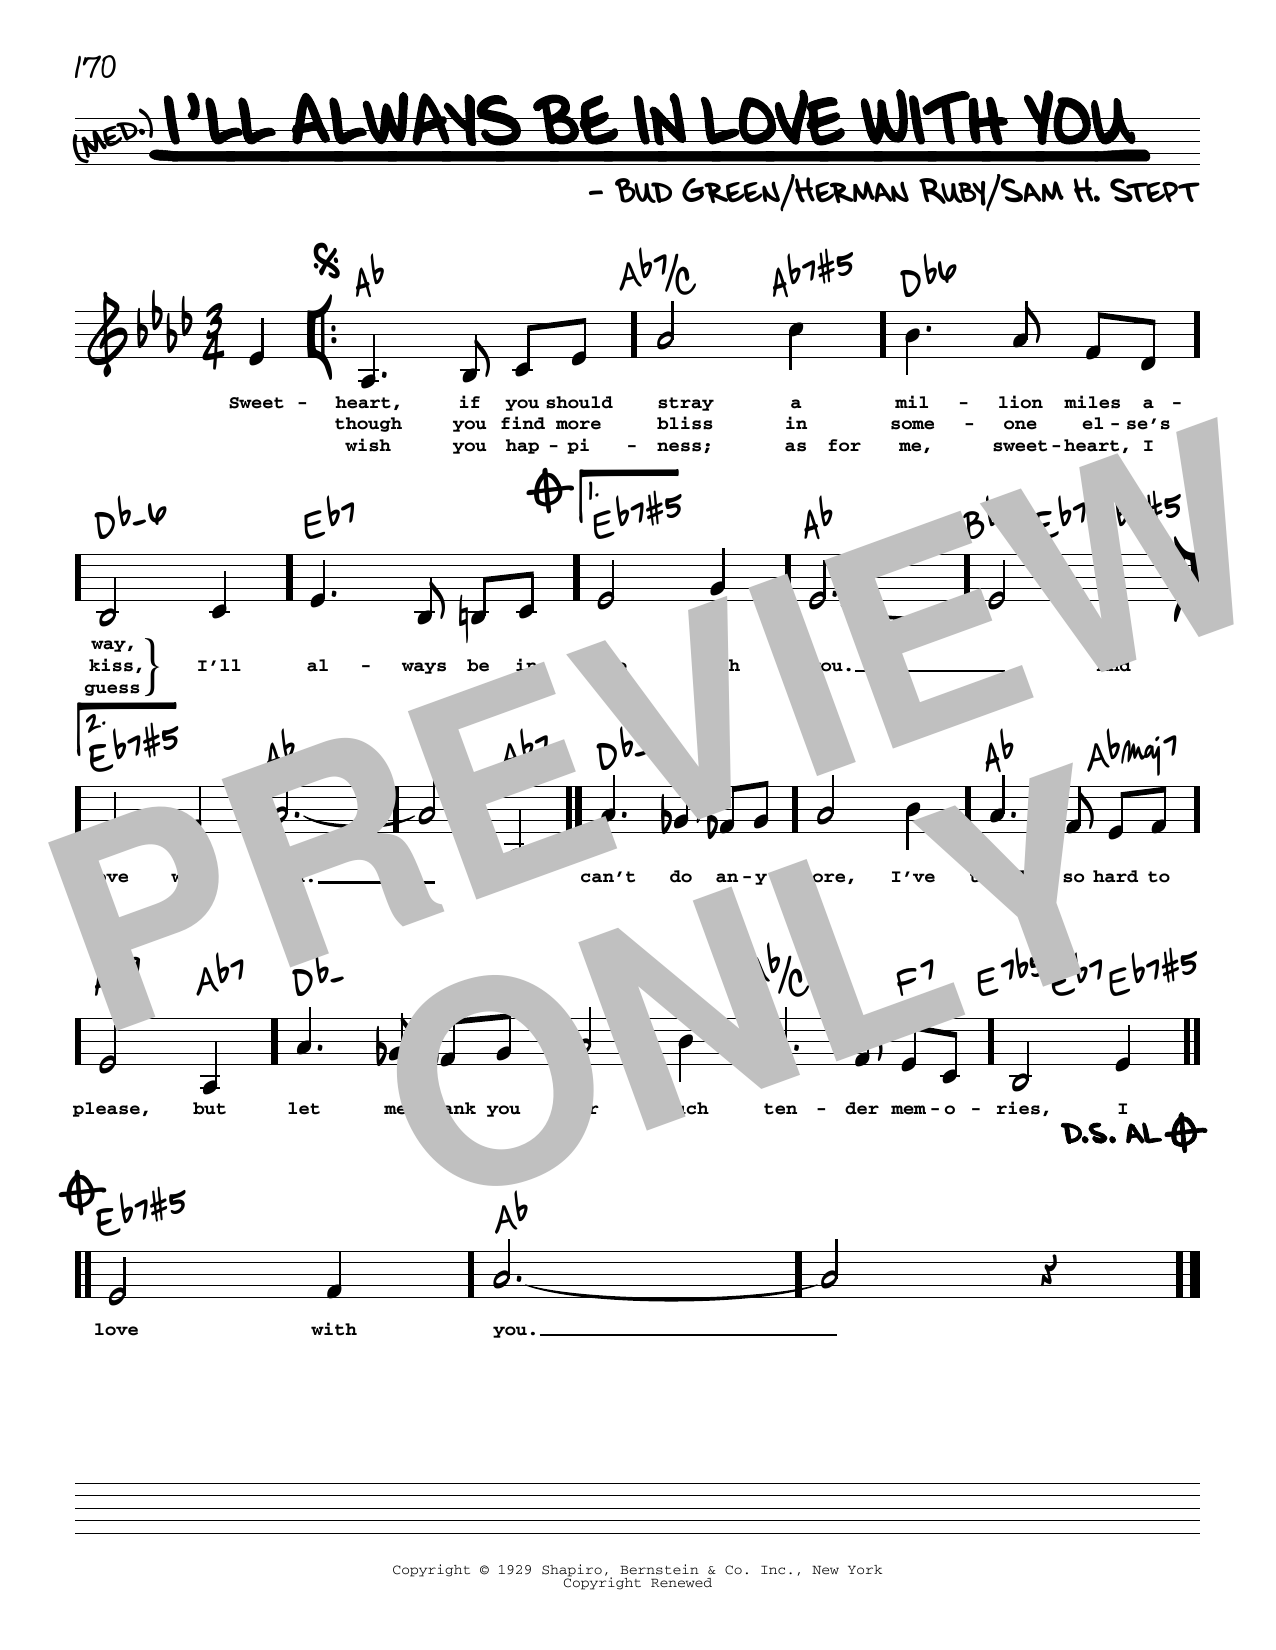 Bud Green I'll Always Be In Love With You (Low Voice) sheet music notes printable PDF score